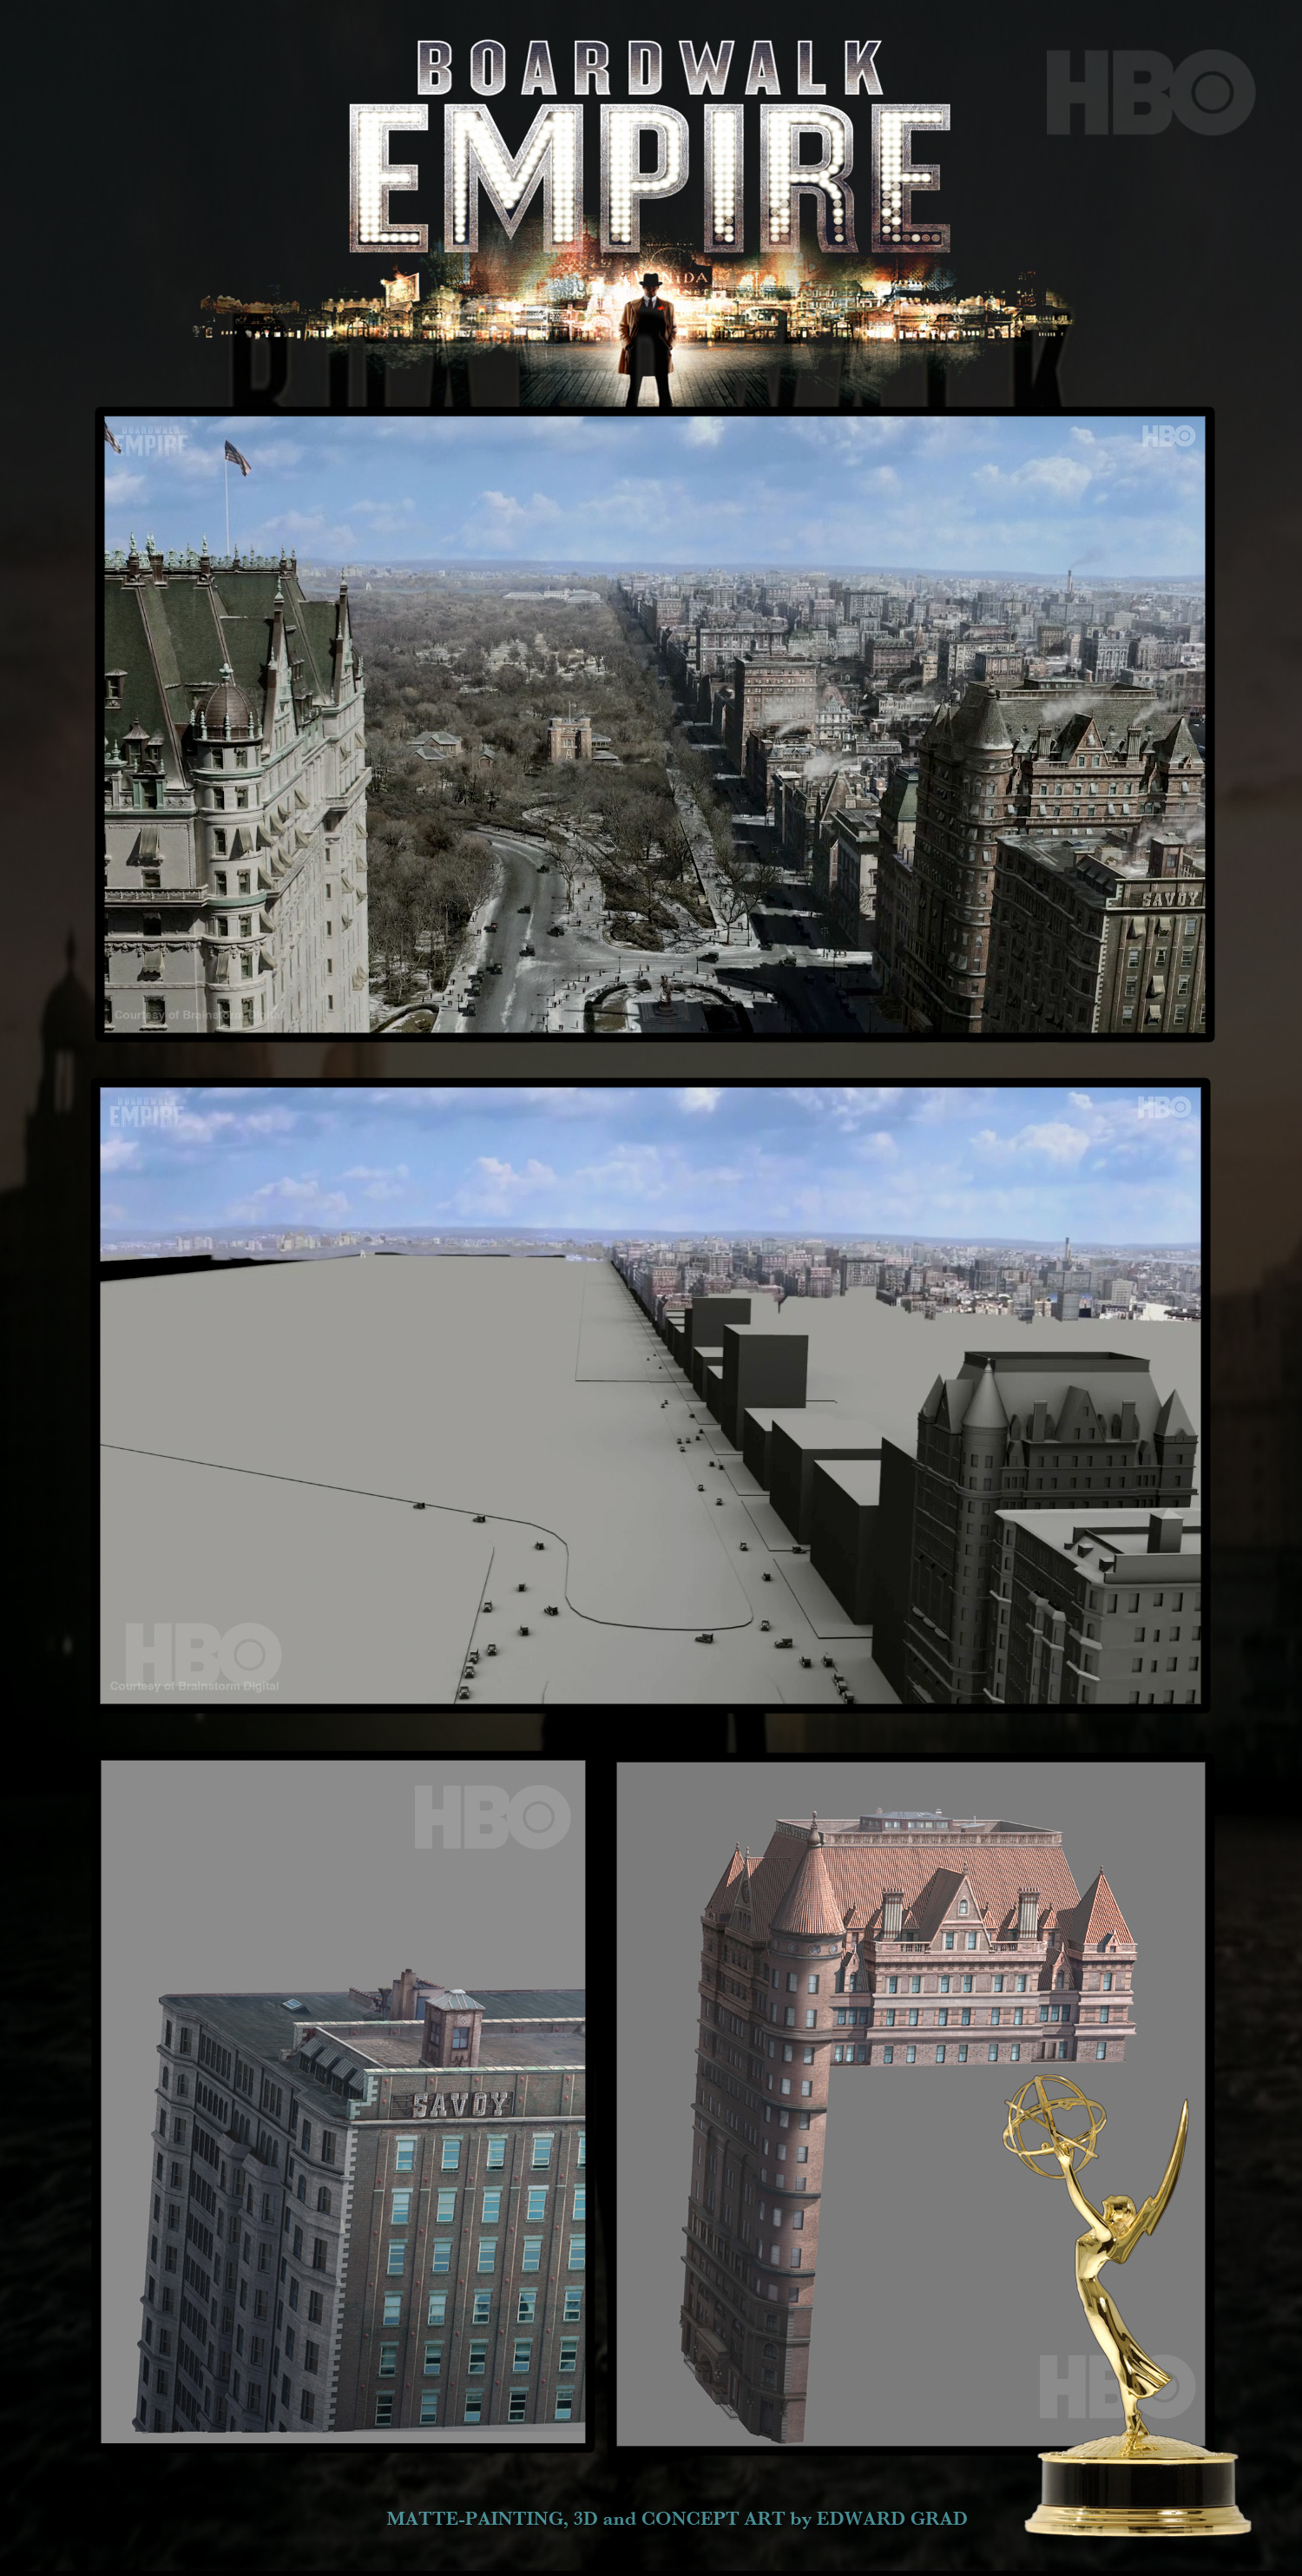 Boardwalk Empire. Digital matte-painting, 3D Modeling, texturing, animation and historical development. EMMY Award won for this work.